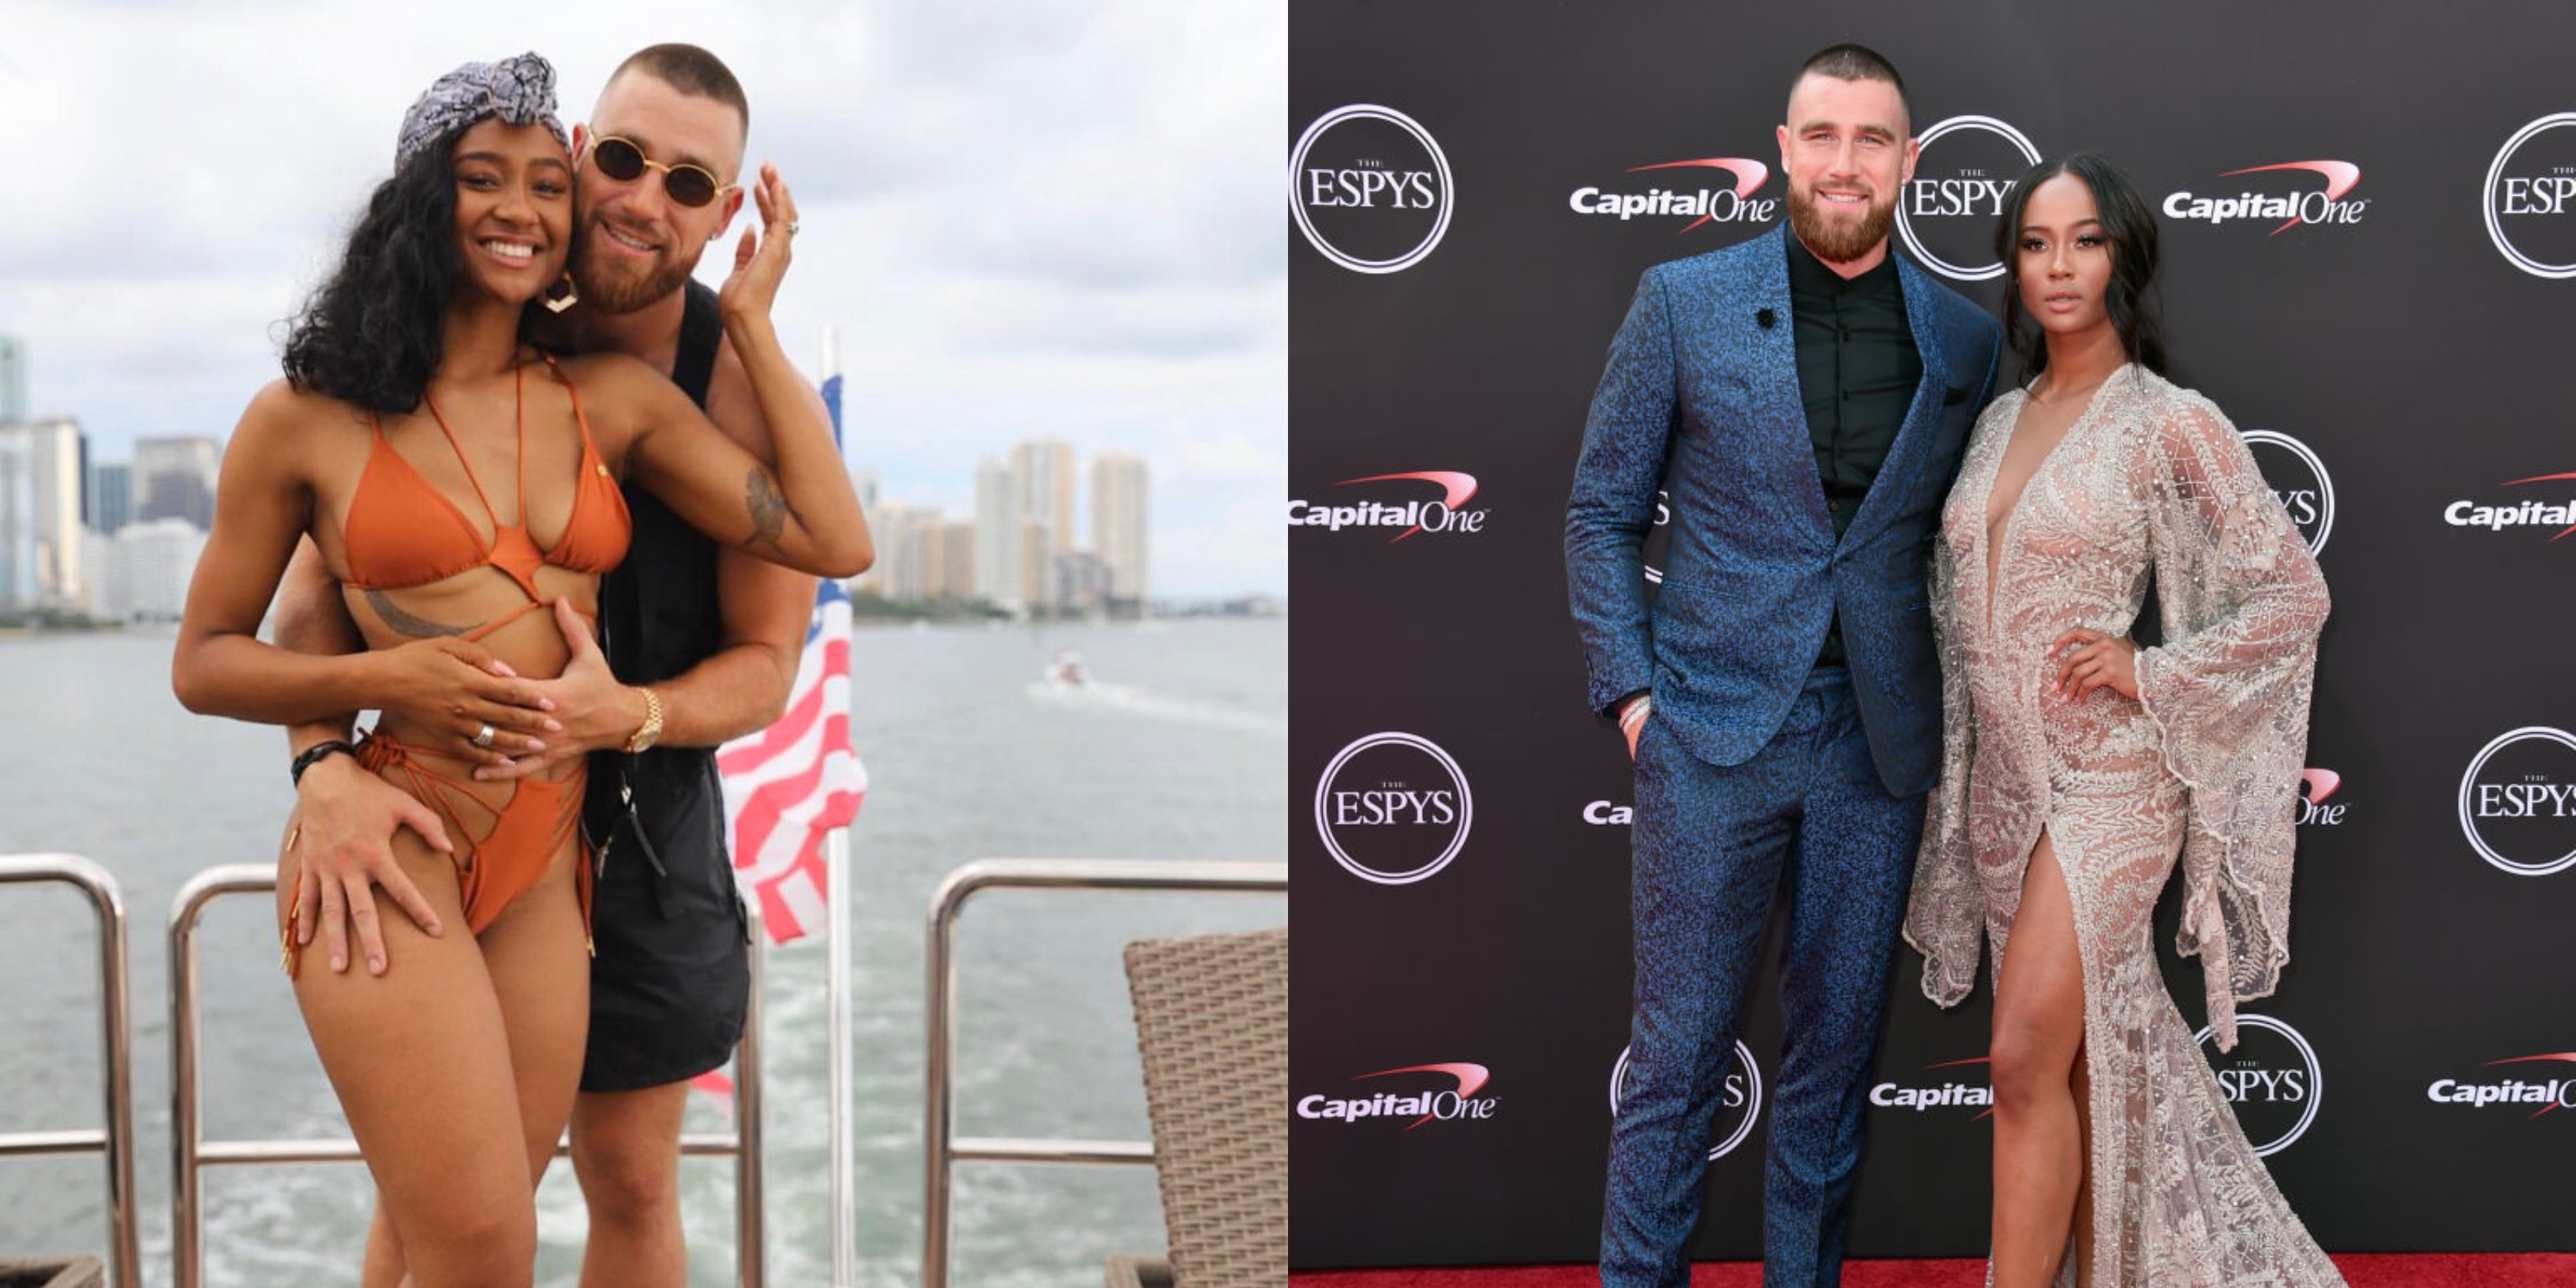 Rumor Suggests Travis Kelce Dumped By GF After Cheating Scandal, Unfollowed...